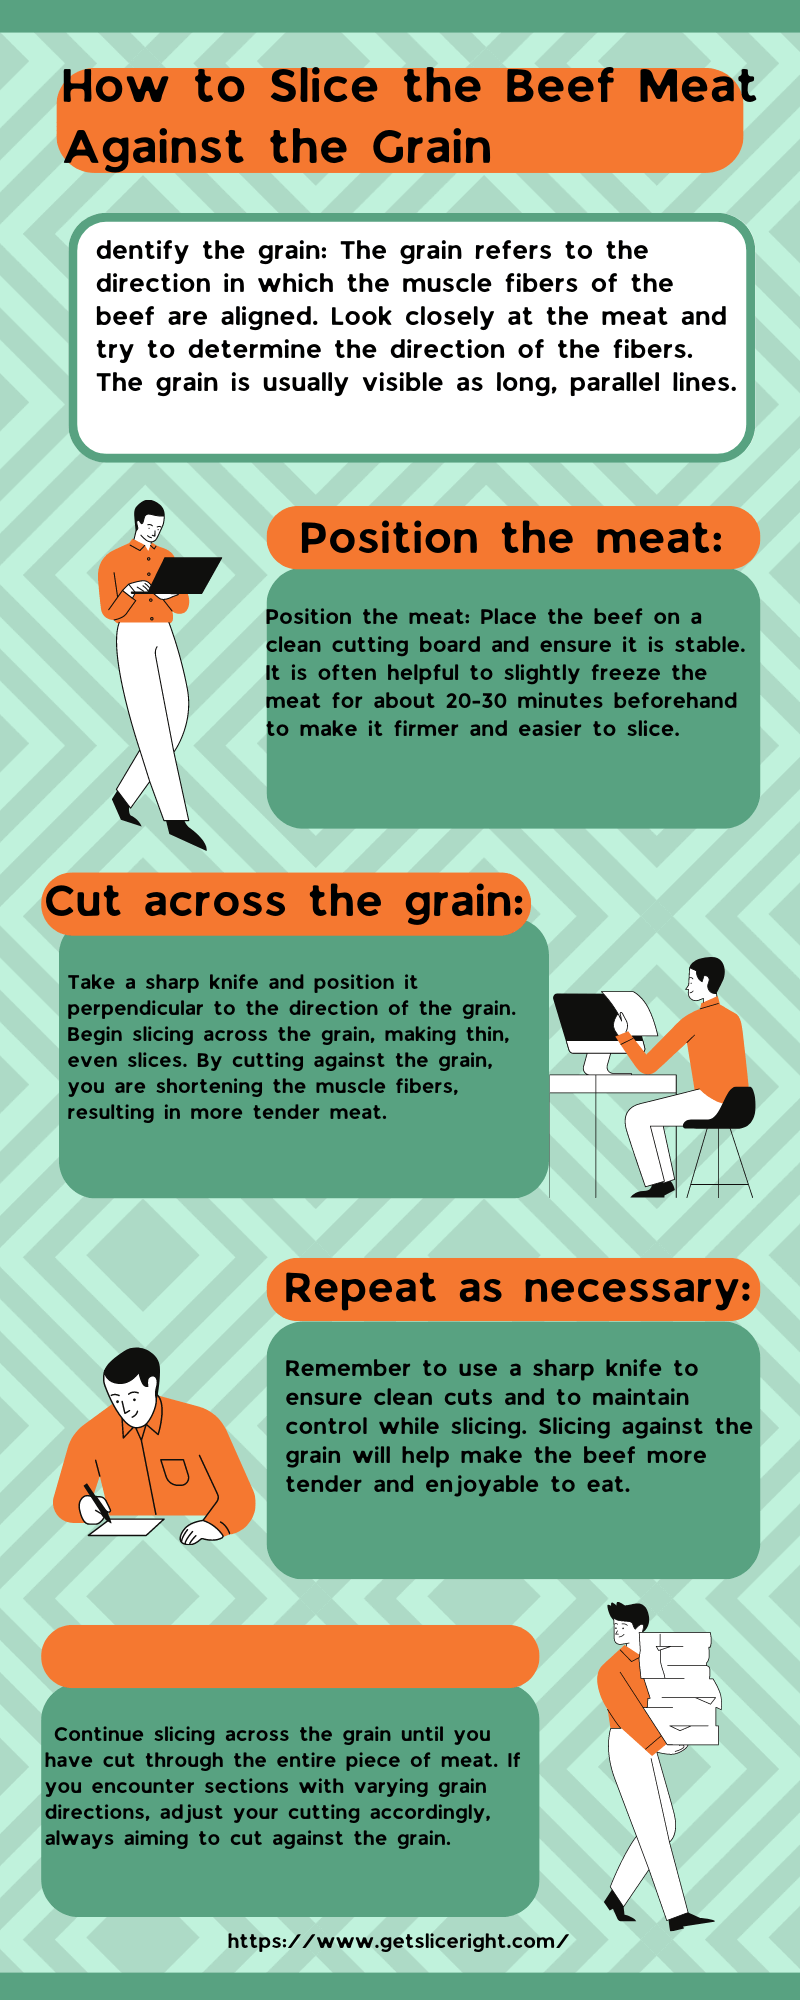 How to slice beef meat against the grain - Getsliceright Infographic